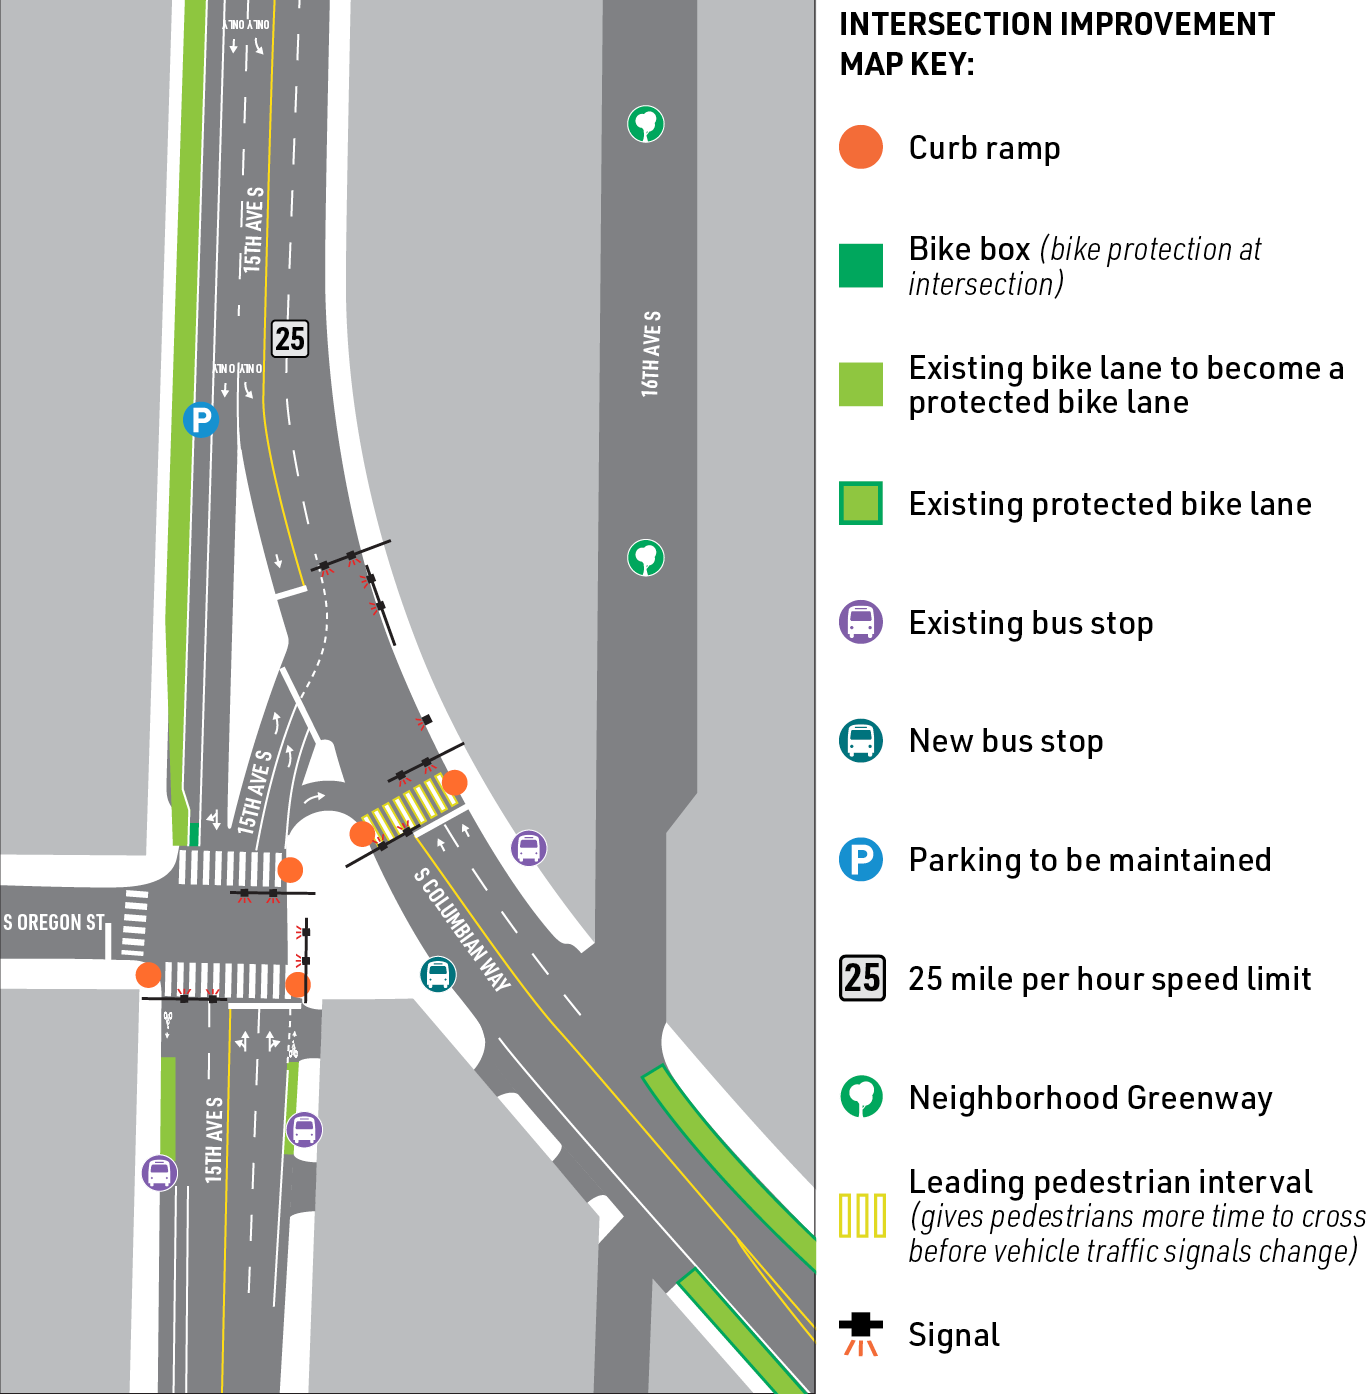 Intersection Improvements at S Oregon St/15th Ave S/Columbian Way